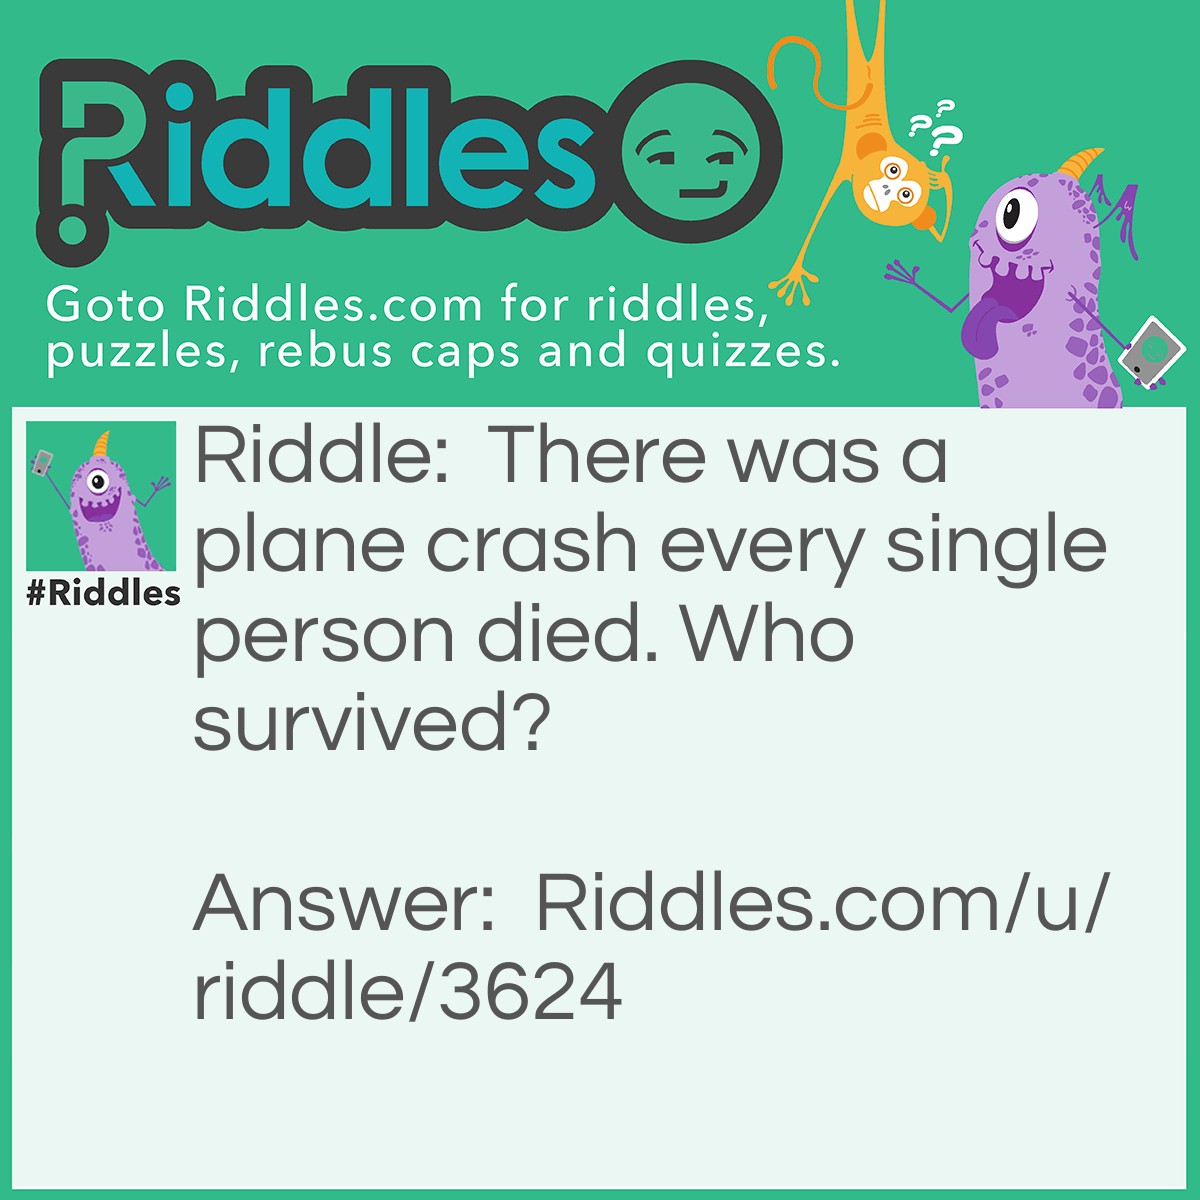 Riddle: There was a plane crash every single person died. Who survived? Answer: The married couple.